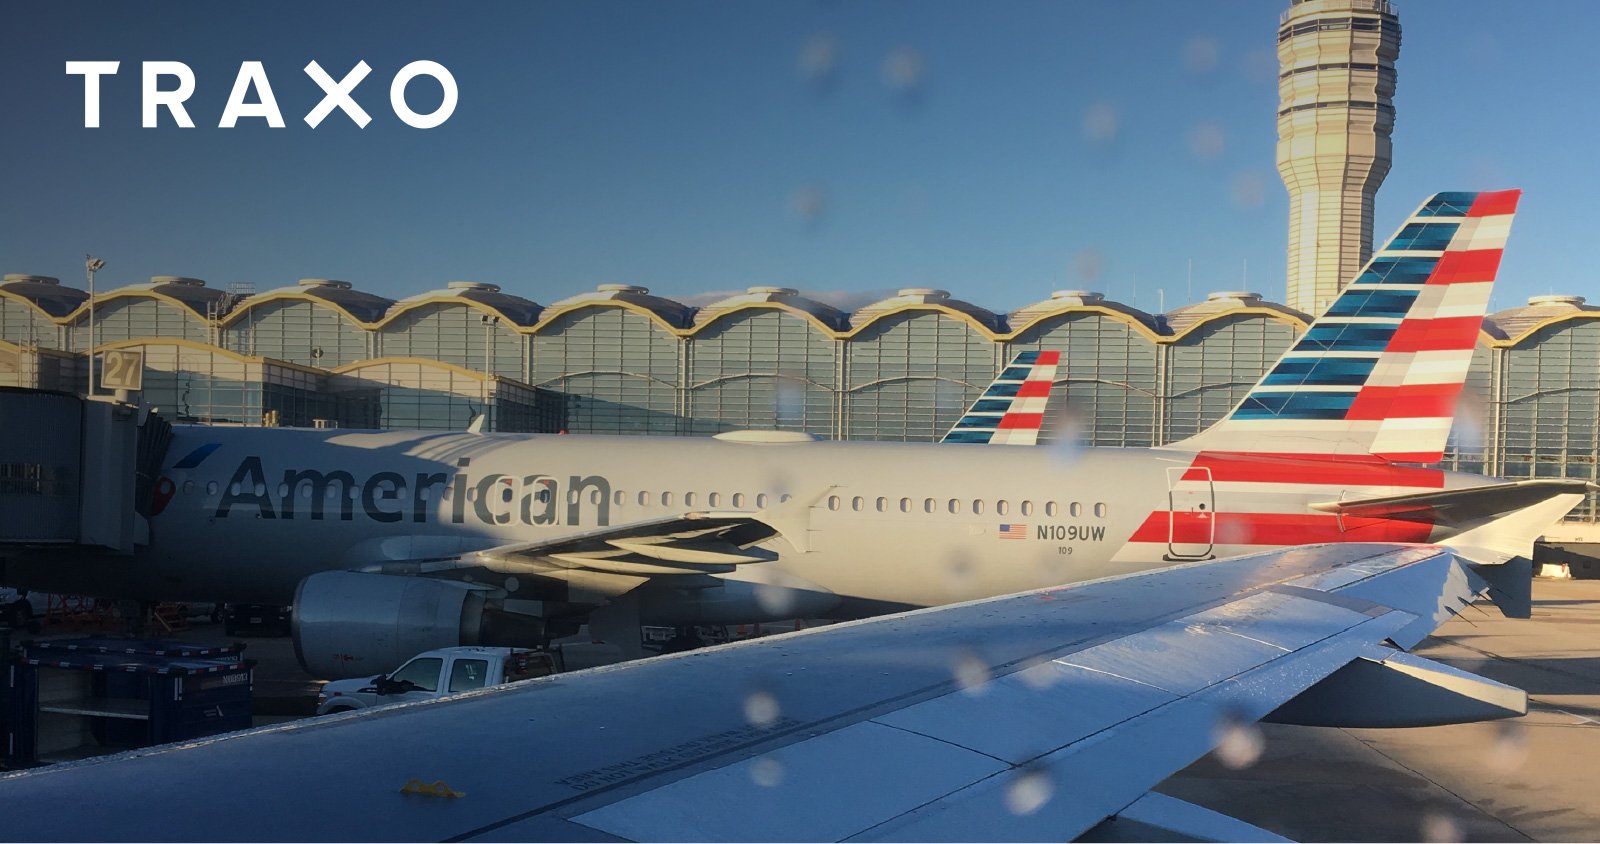 American Airlines Planes at Airport